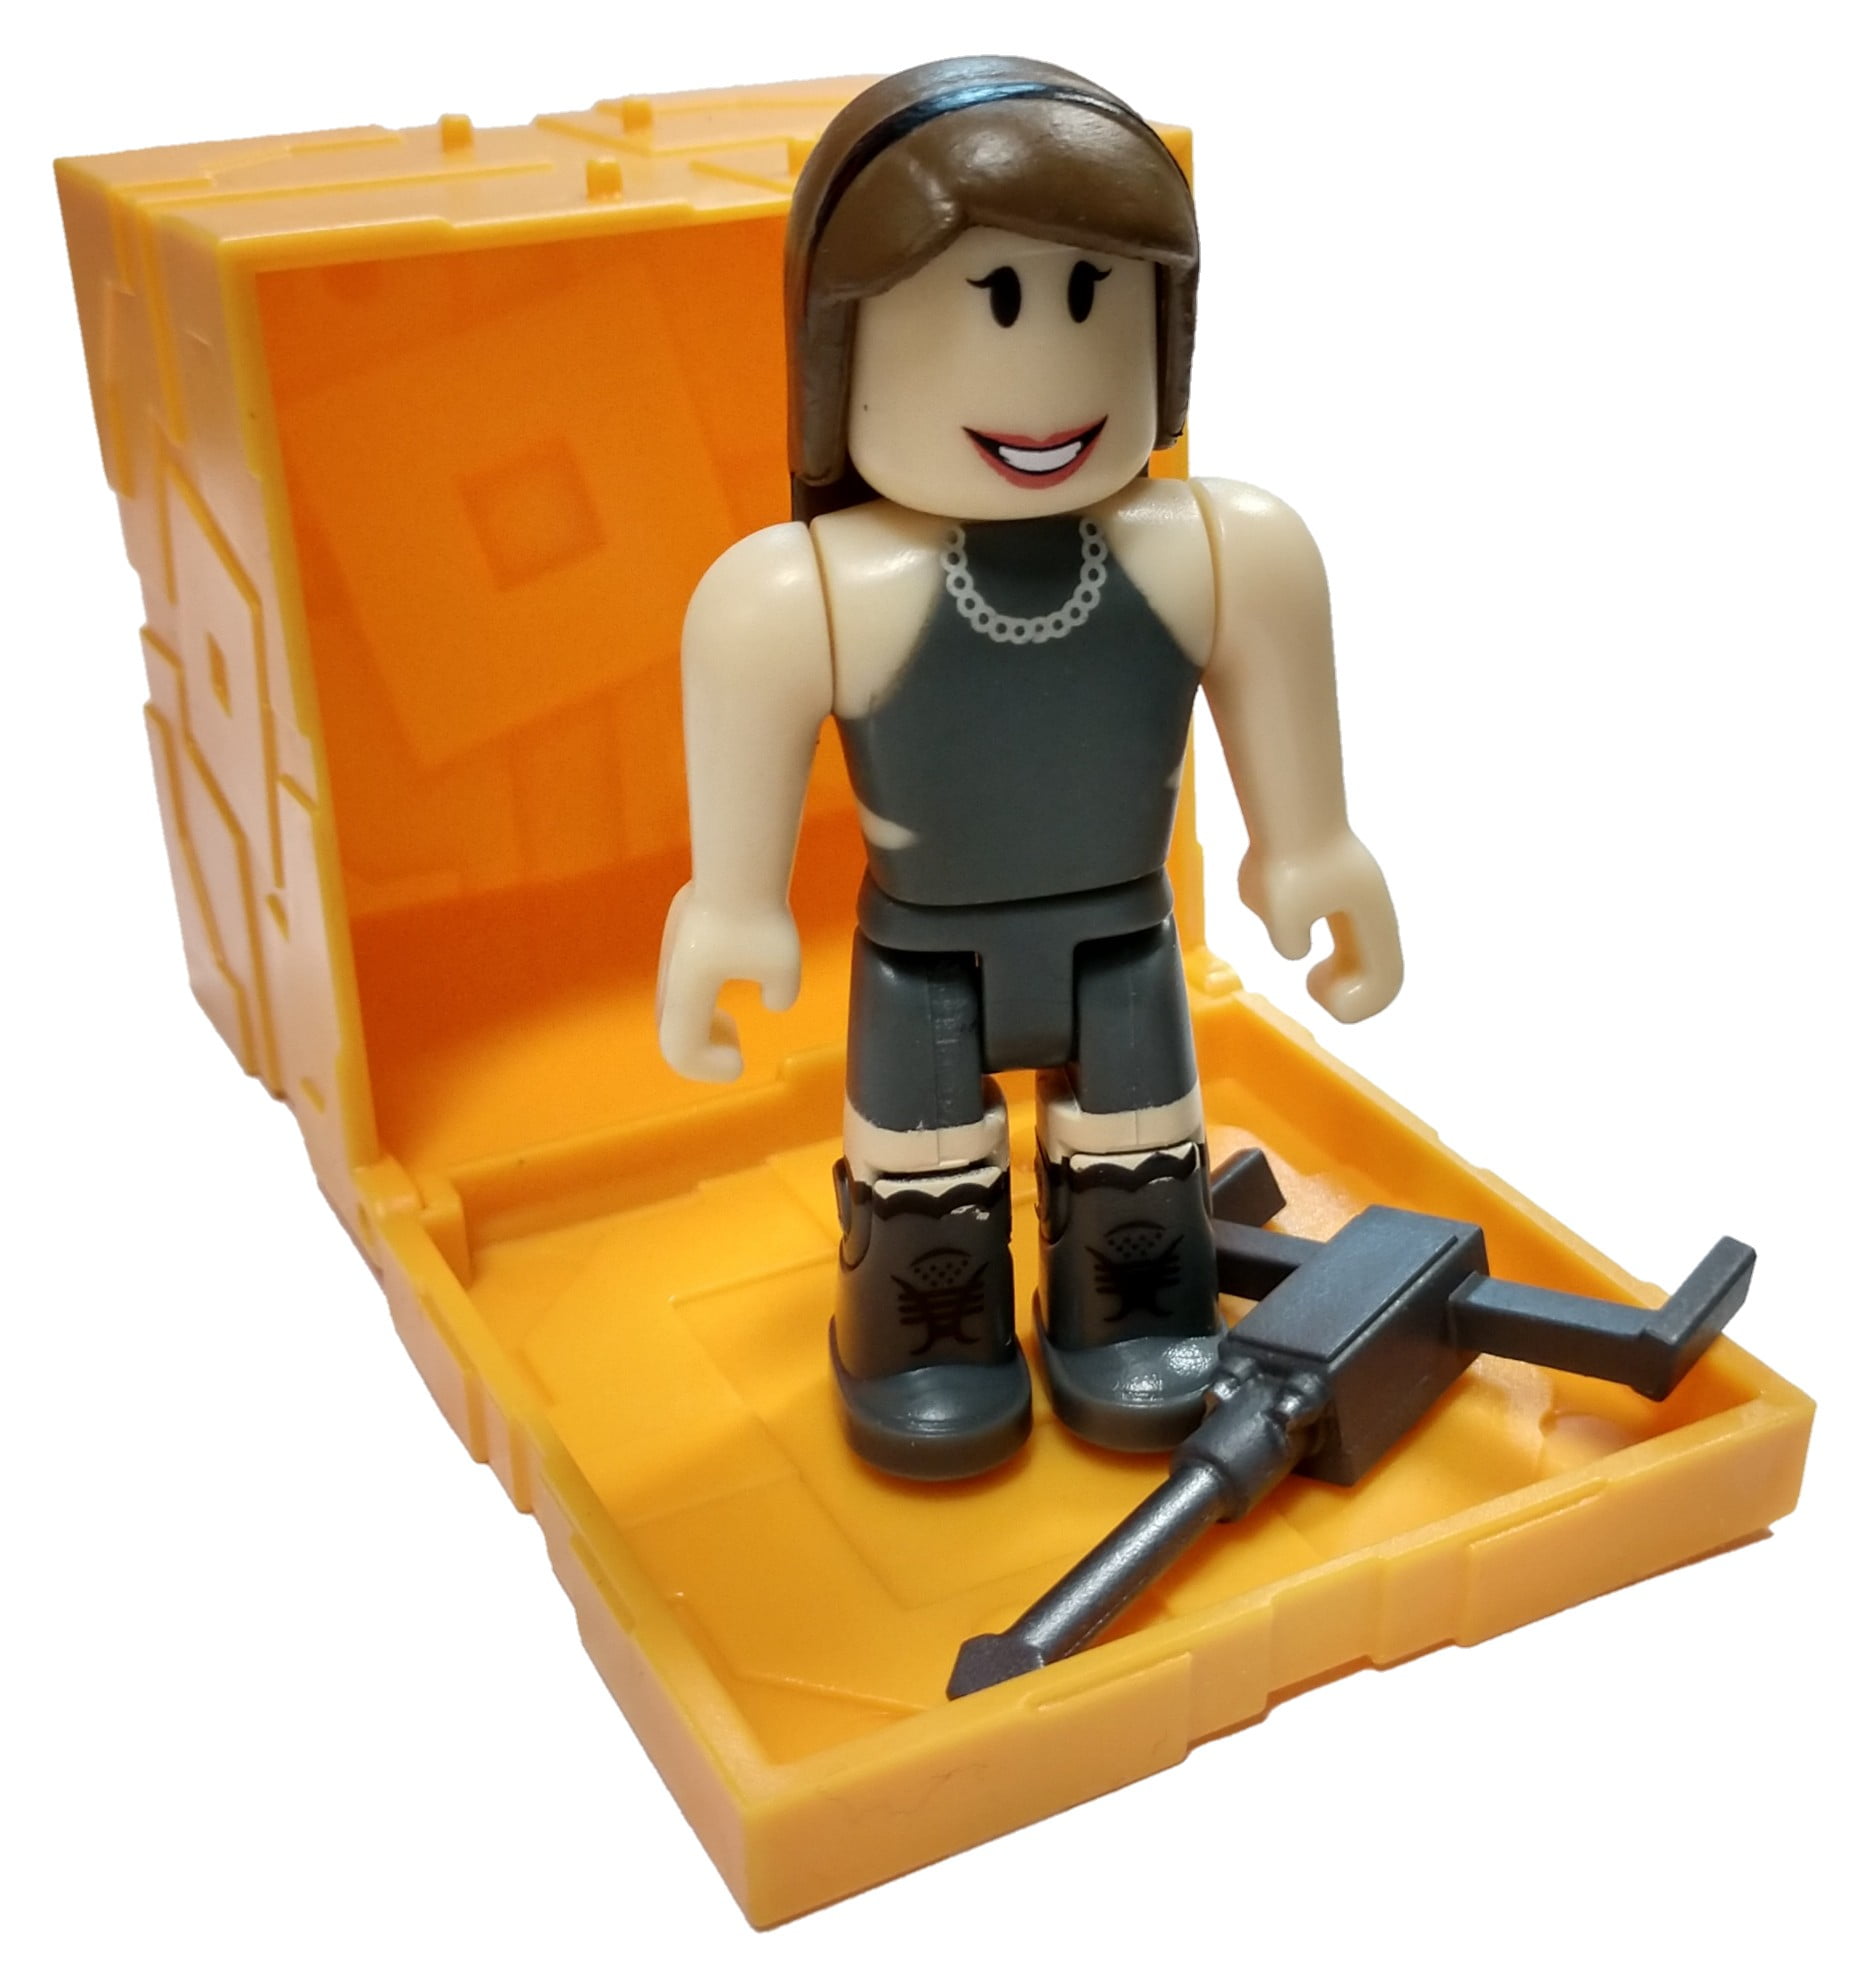 Roblox Series 5 Store Wars Bargain Hunter Mini Figure With Gold Cube And Online Code No Packaging Walmart Com Walmart Com - the hunter roblox